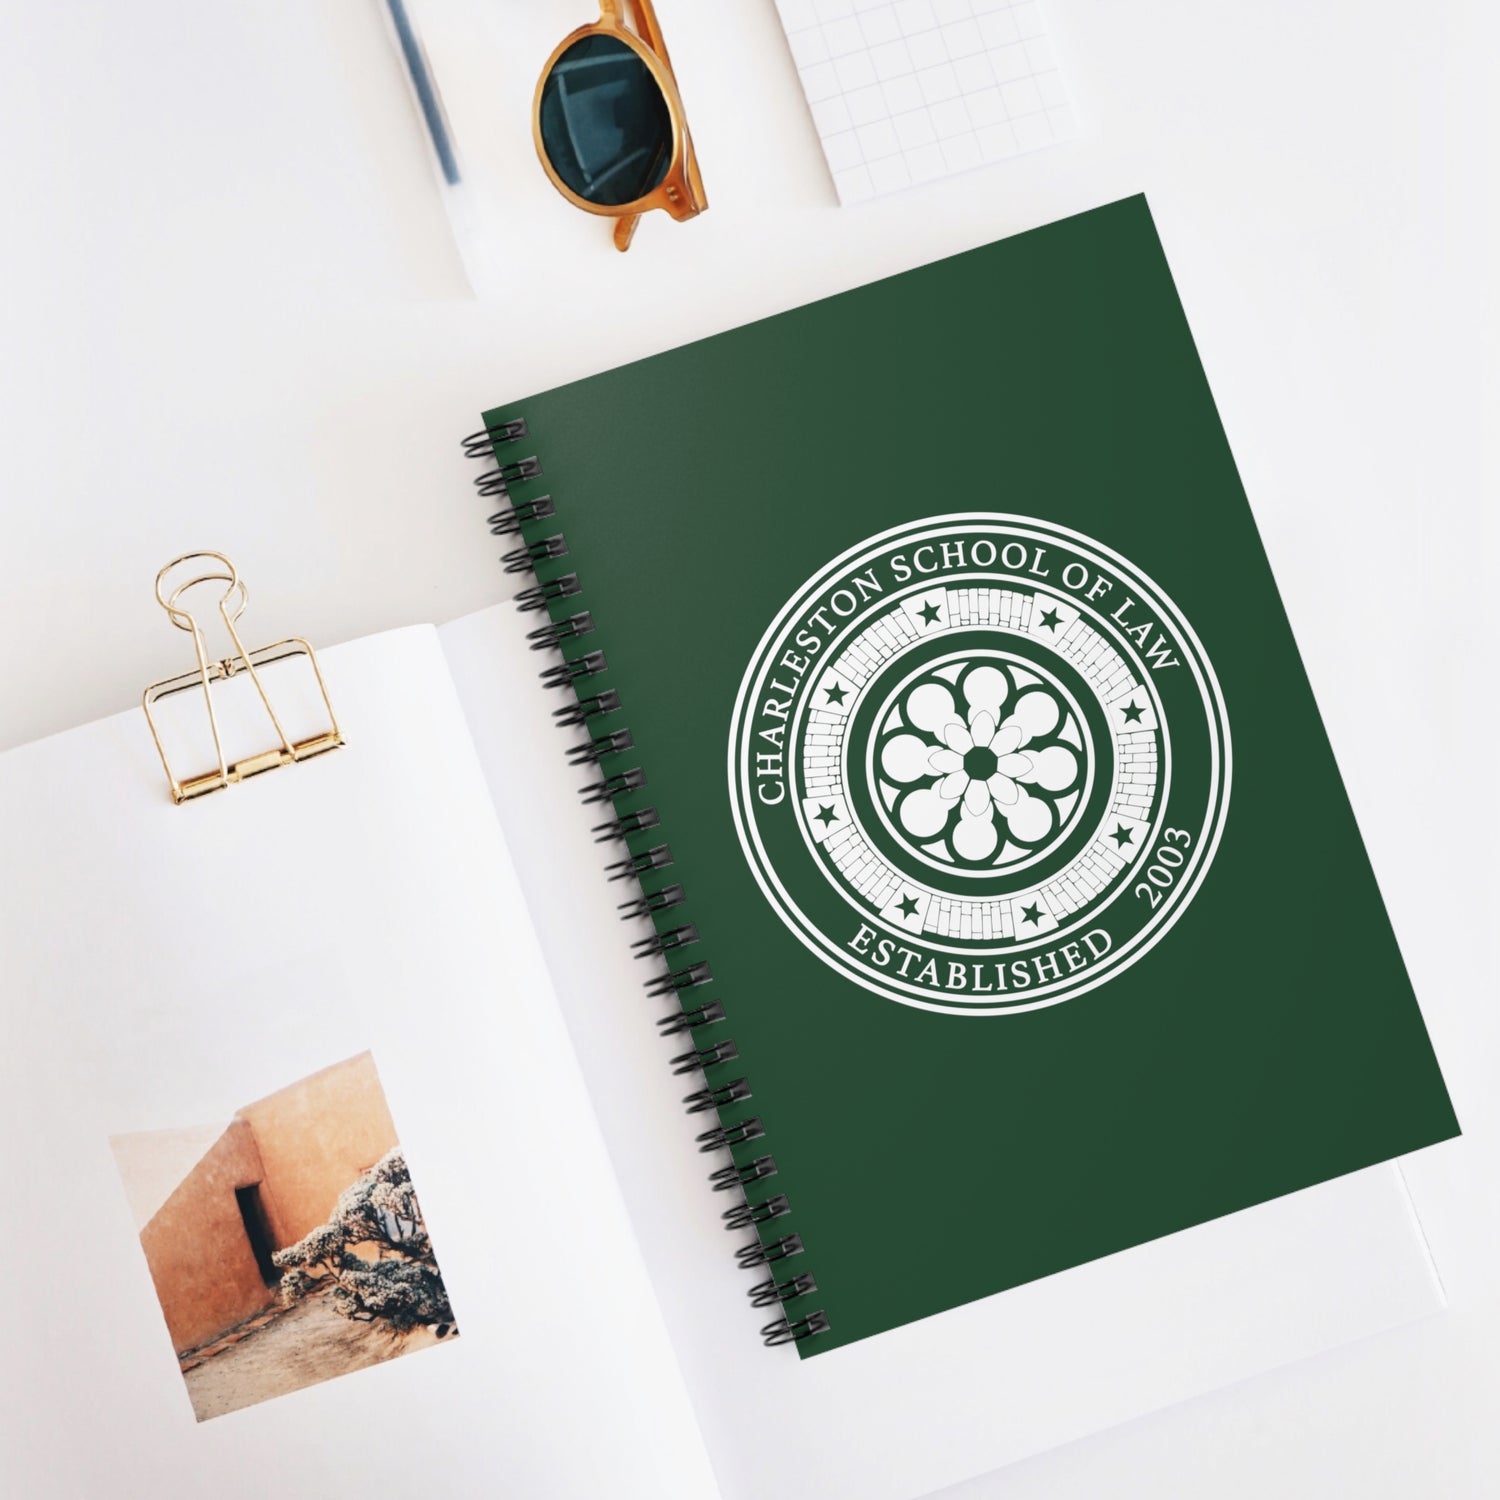 CSOL Seal Spiral Notebook - Ruled Line